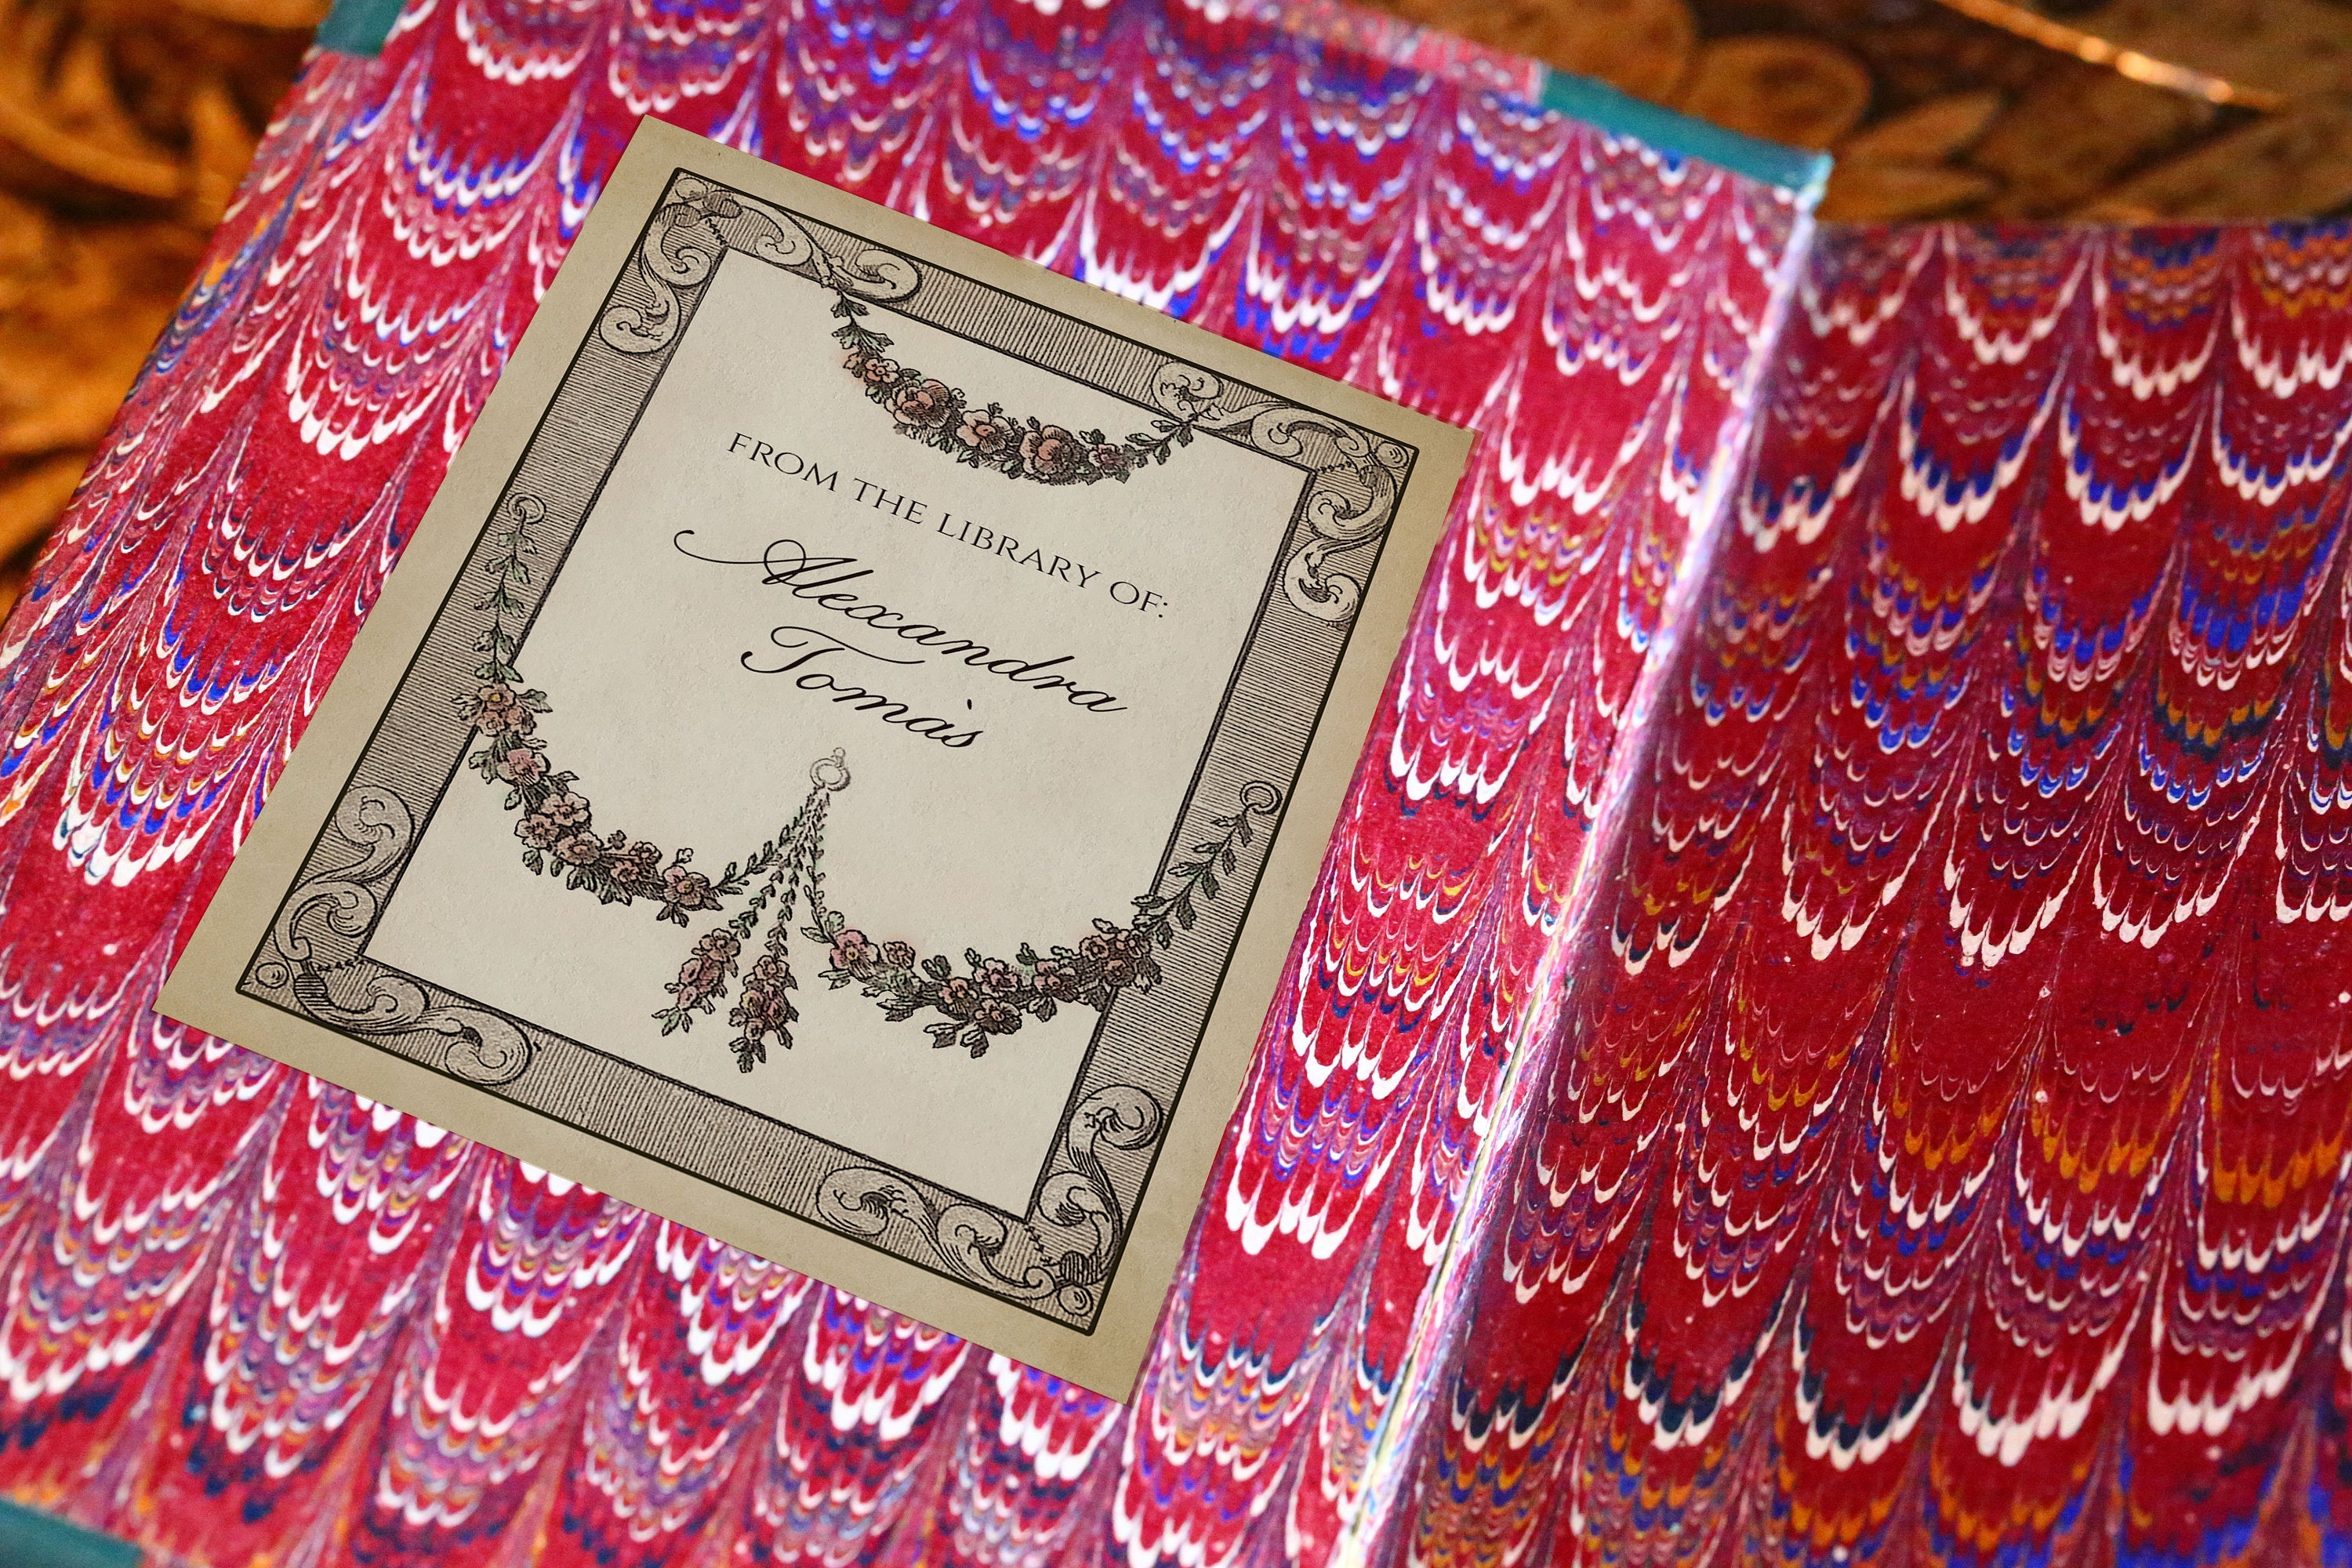 Elegant Garland, Personalized Baroque Ex-Libris Bookplates, Crafted on Traditional Gummed Paper, 2.5in x 4in, Set of 30